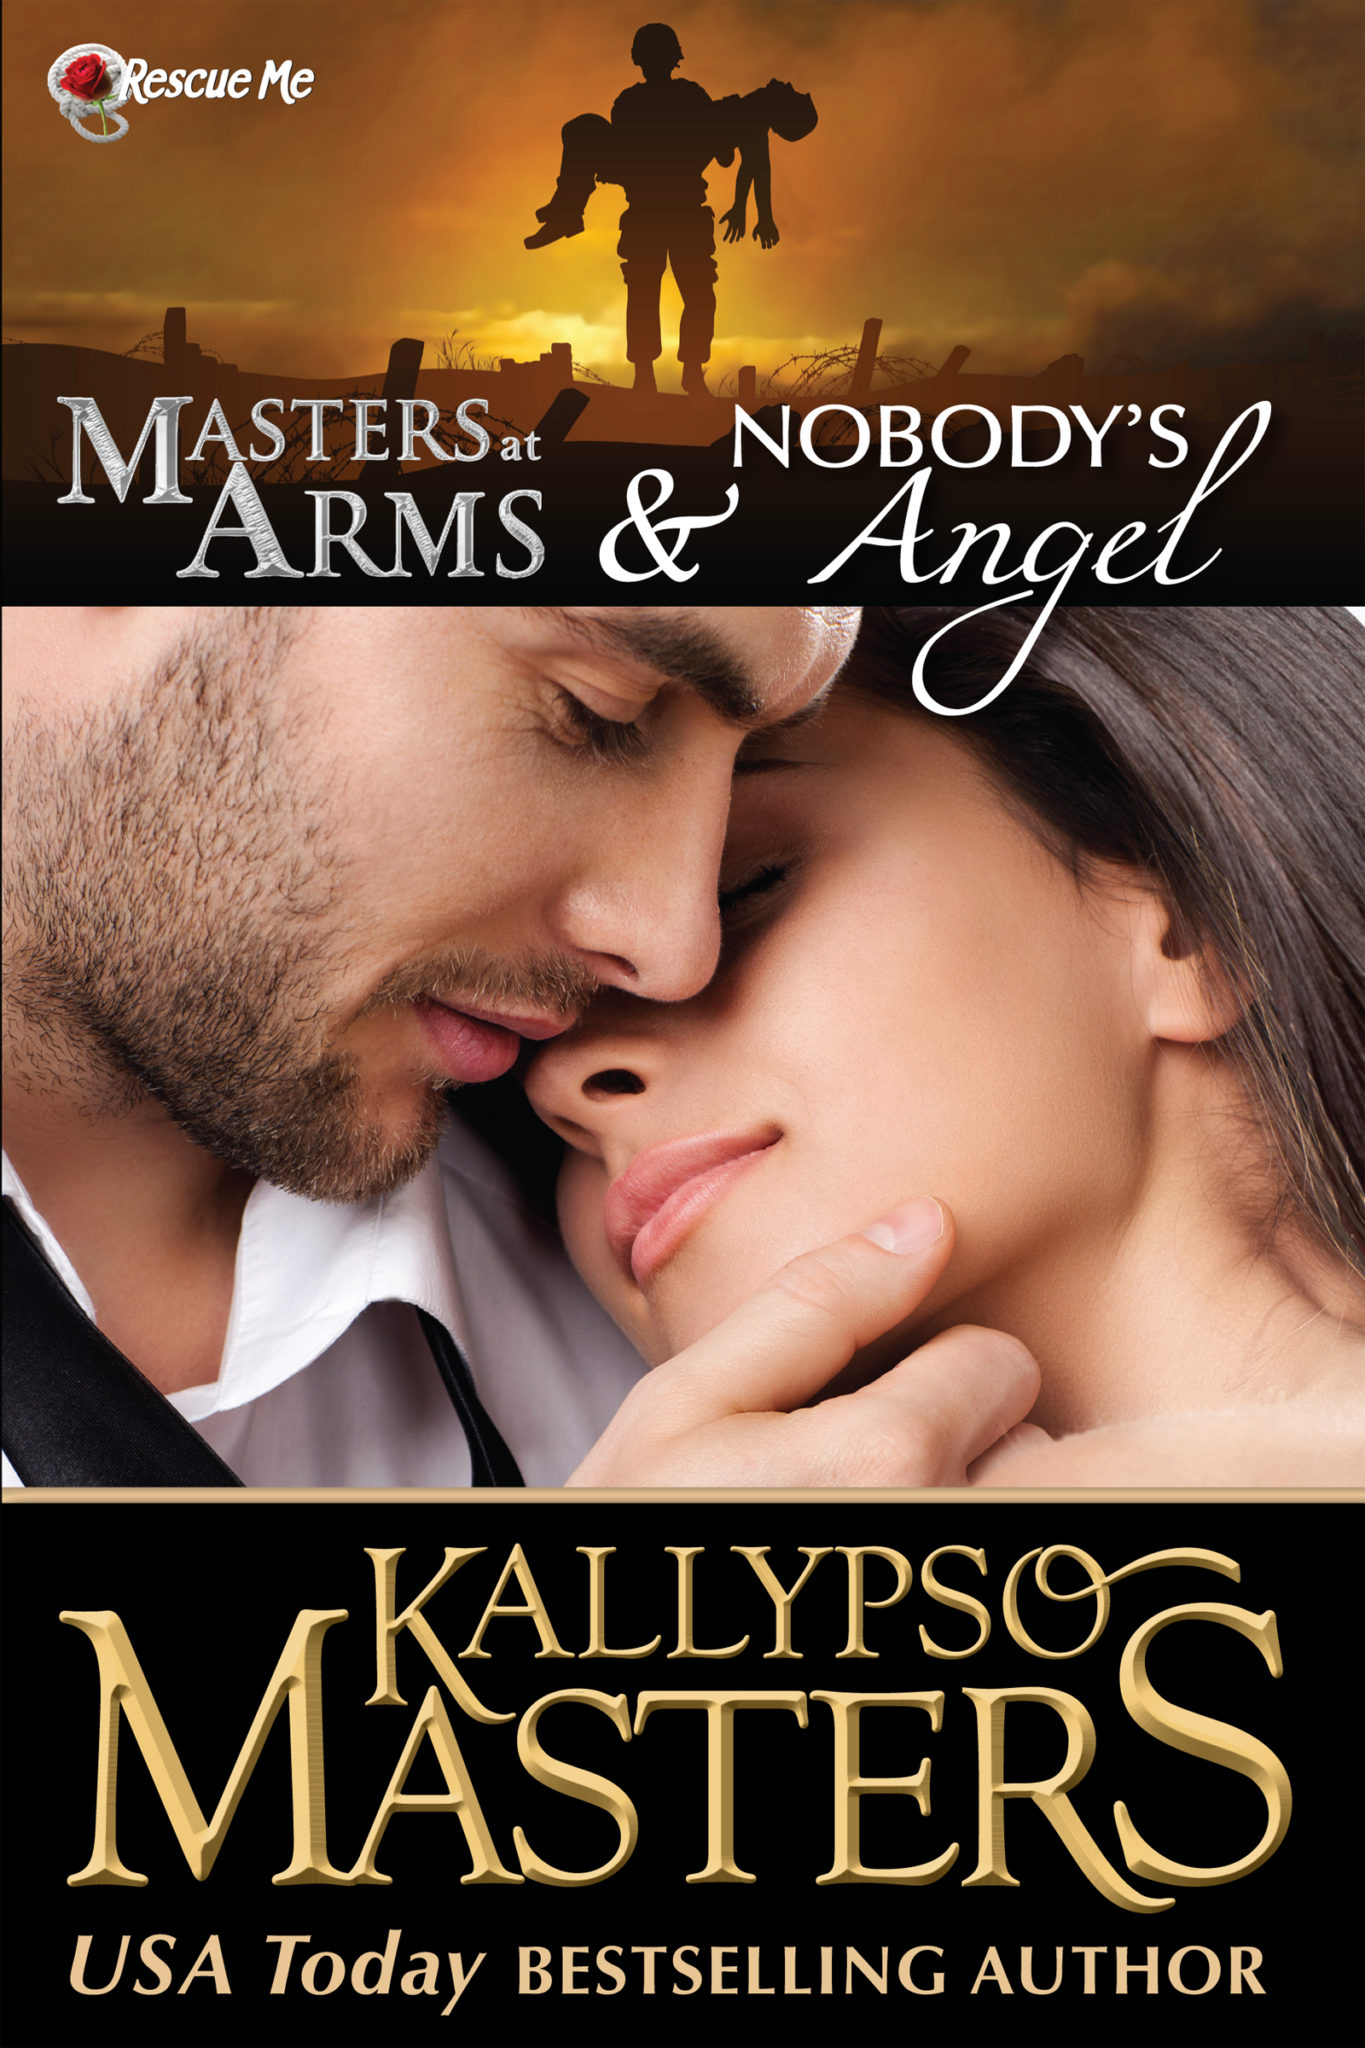 Masters at Arms & Nobody’s Angel (Rescue Me Saga #1) by Kallypso Masters